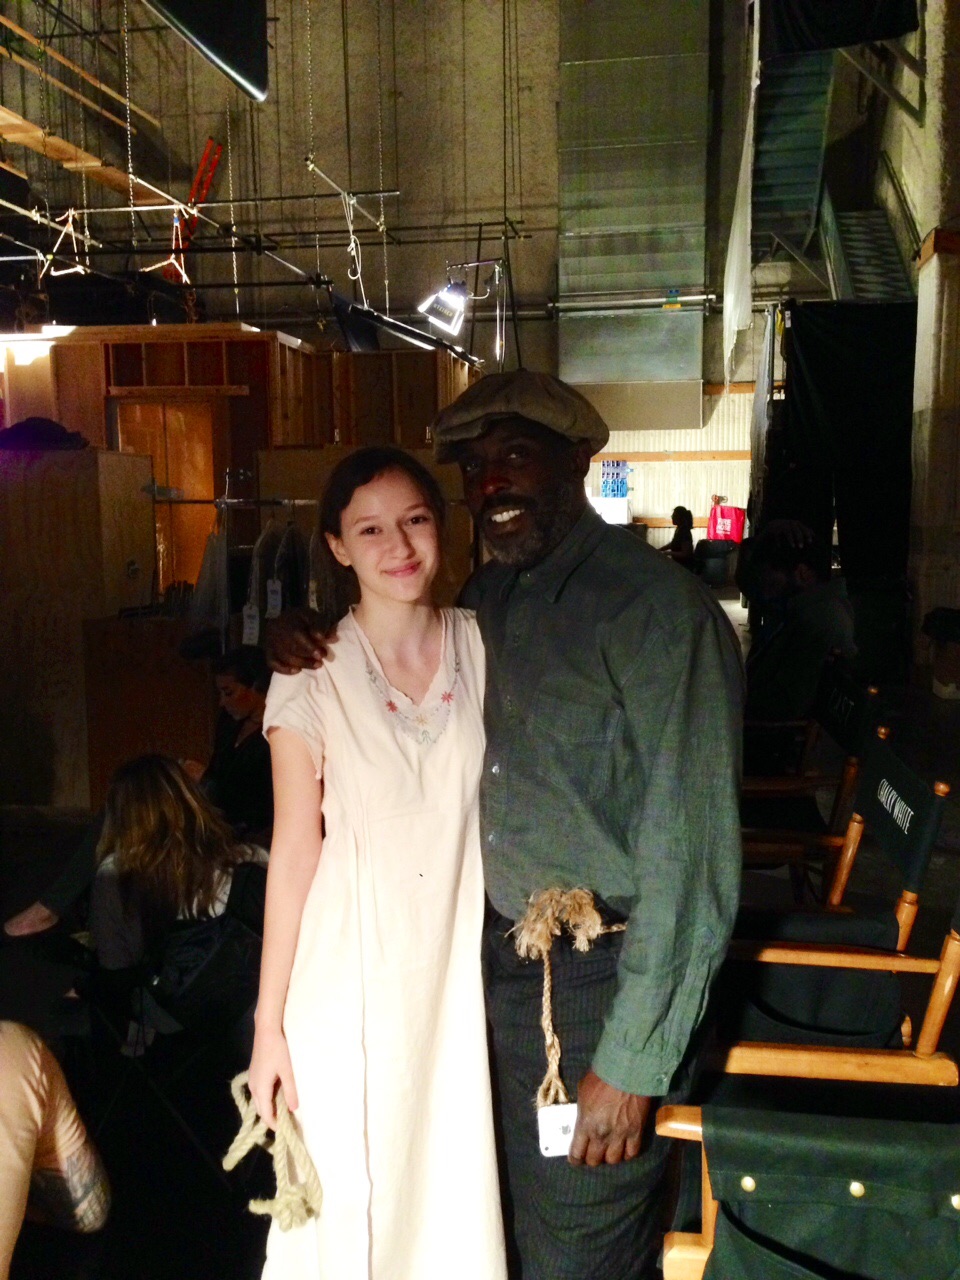 On the set of Boardwalk Empire with Michael K. Williams